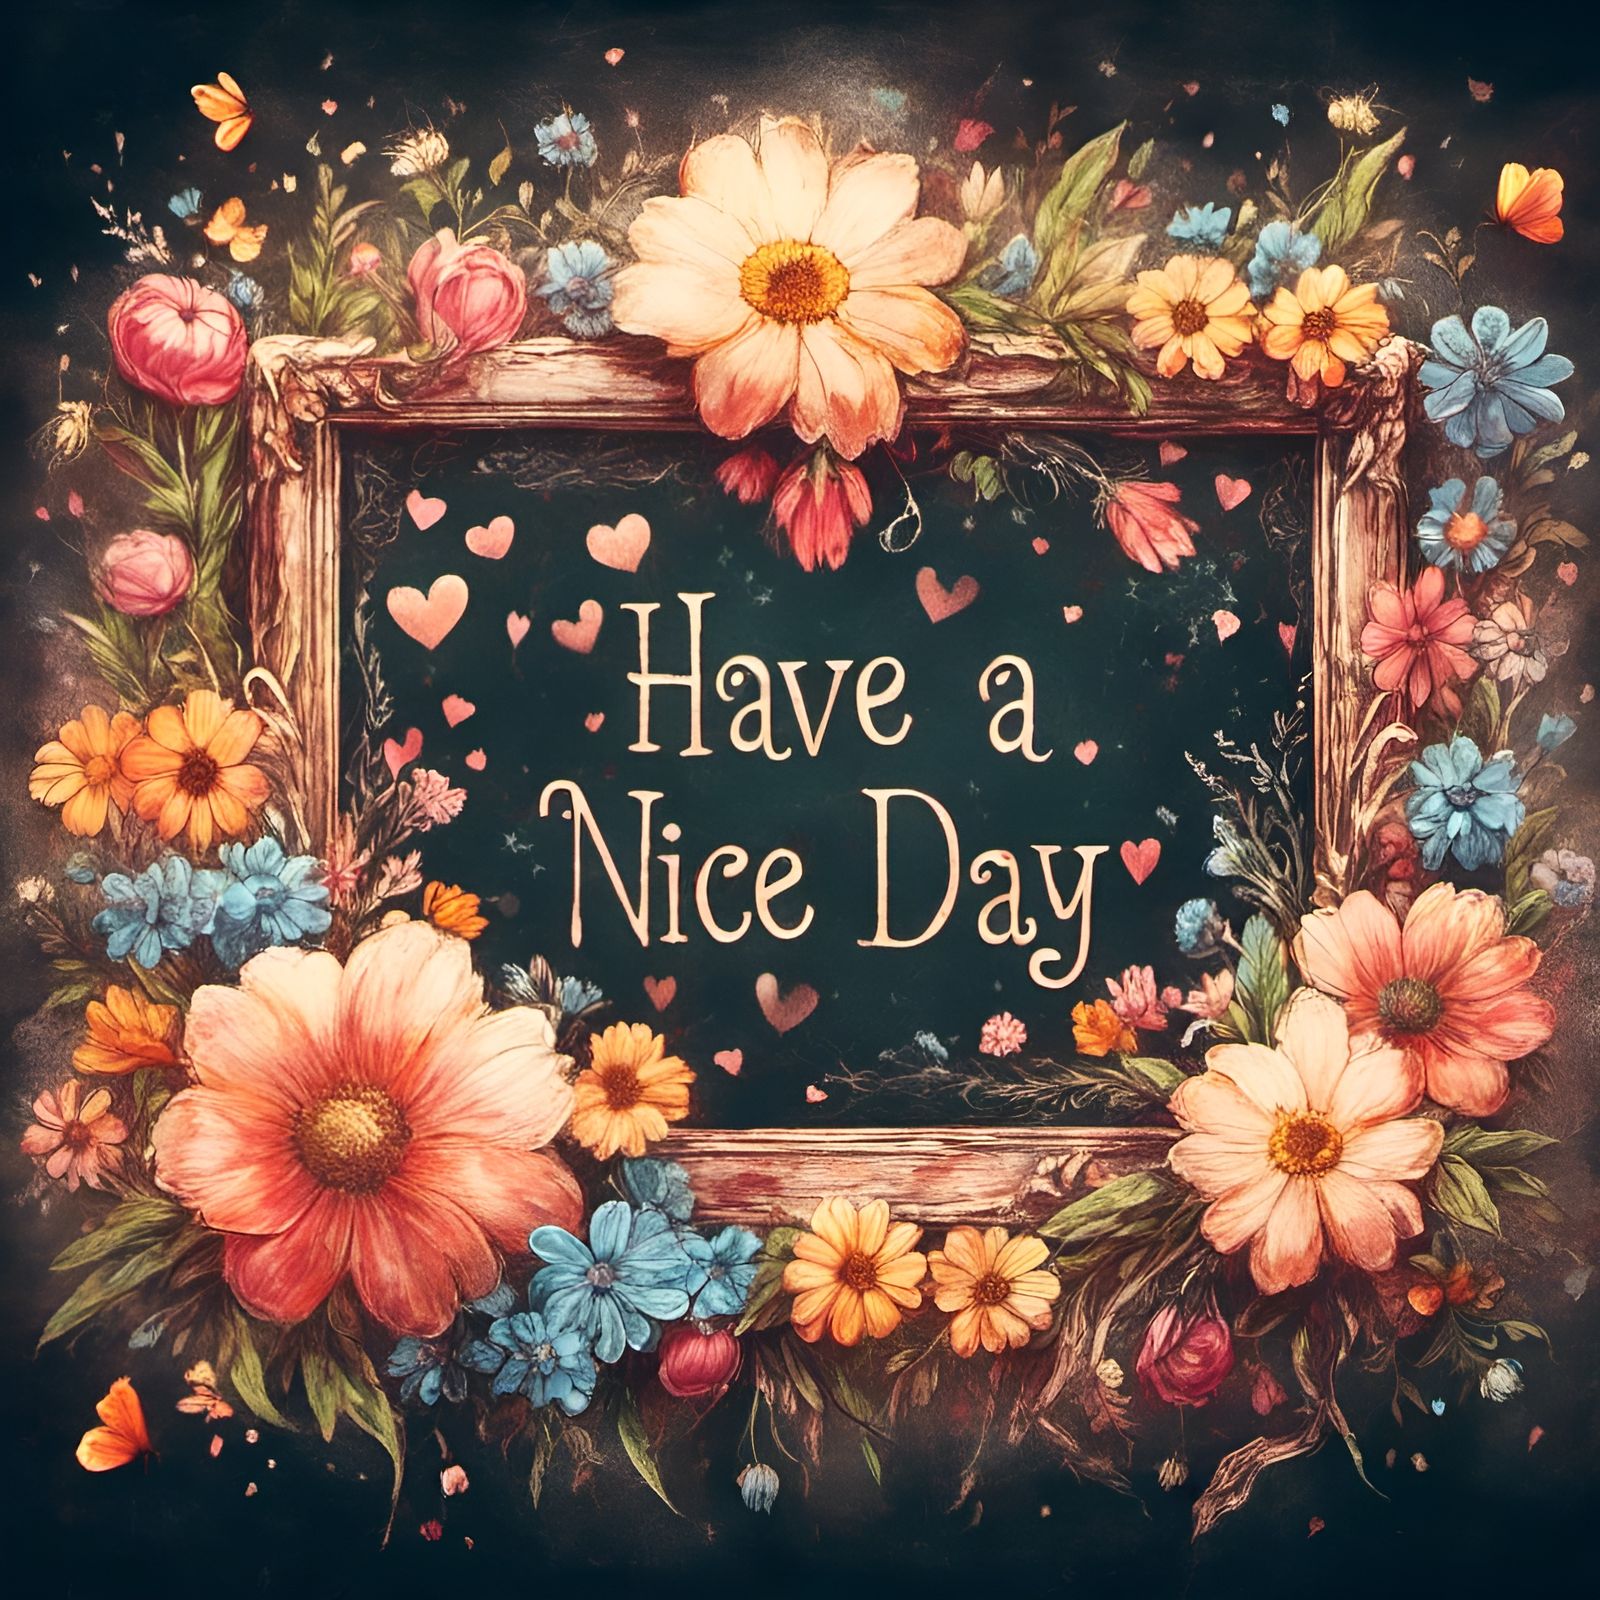 Have a nice day ♥️